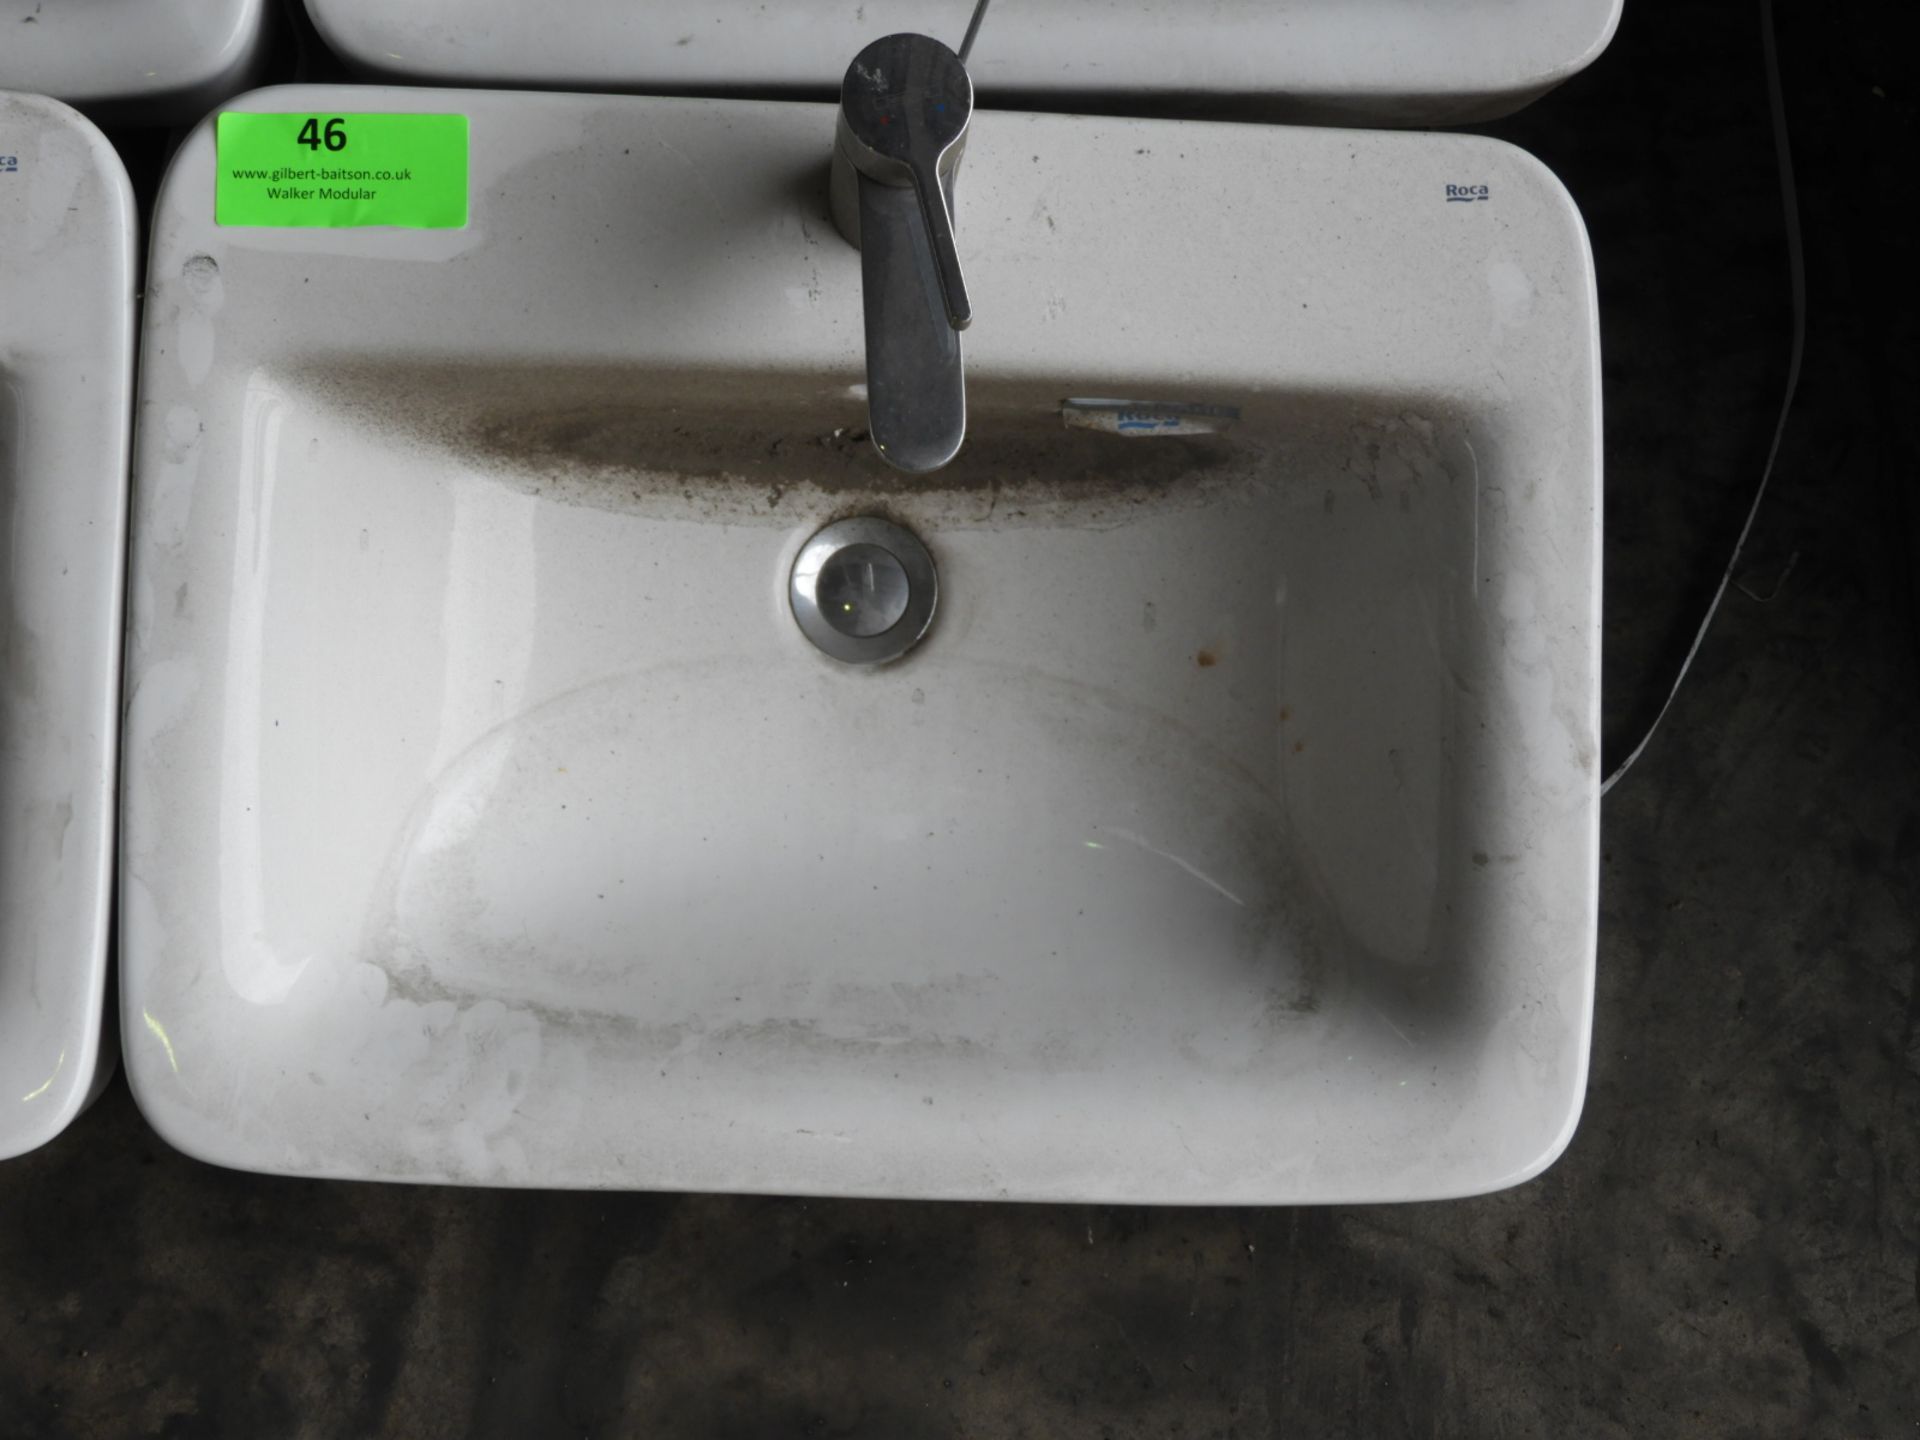 *White Ceramic "Roca" Vanity Unit Basin with Monobloc Tap and Waste - Image 2 of 2